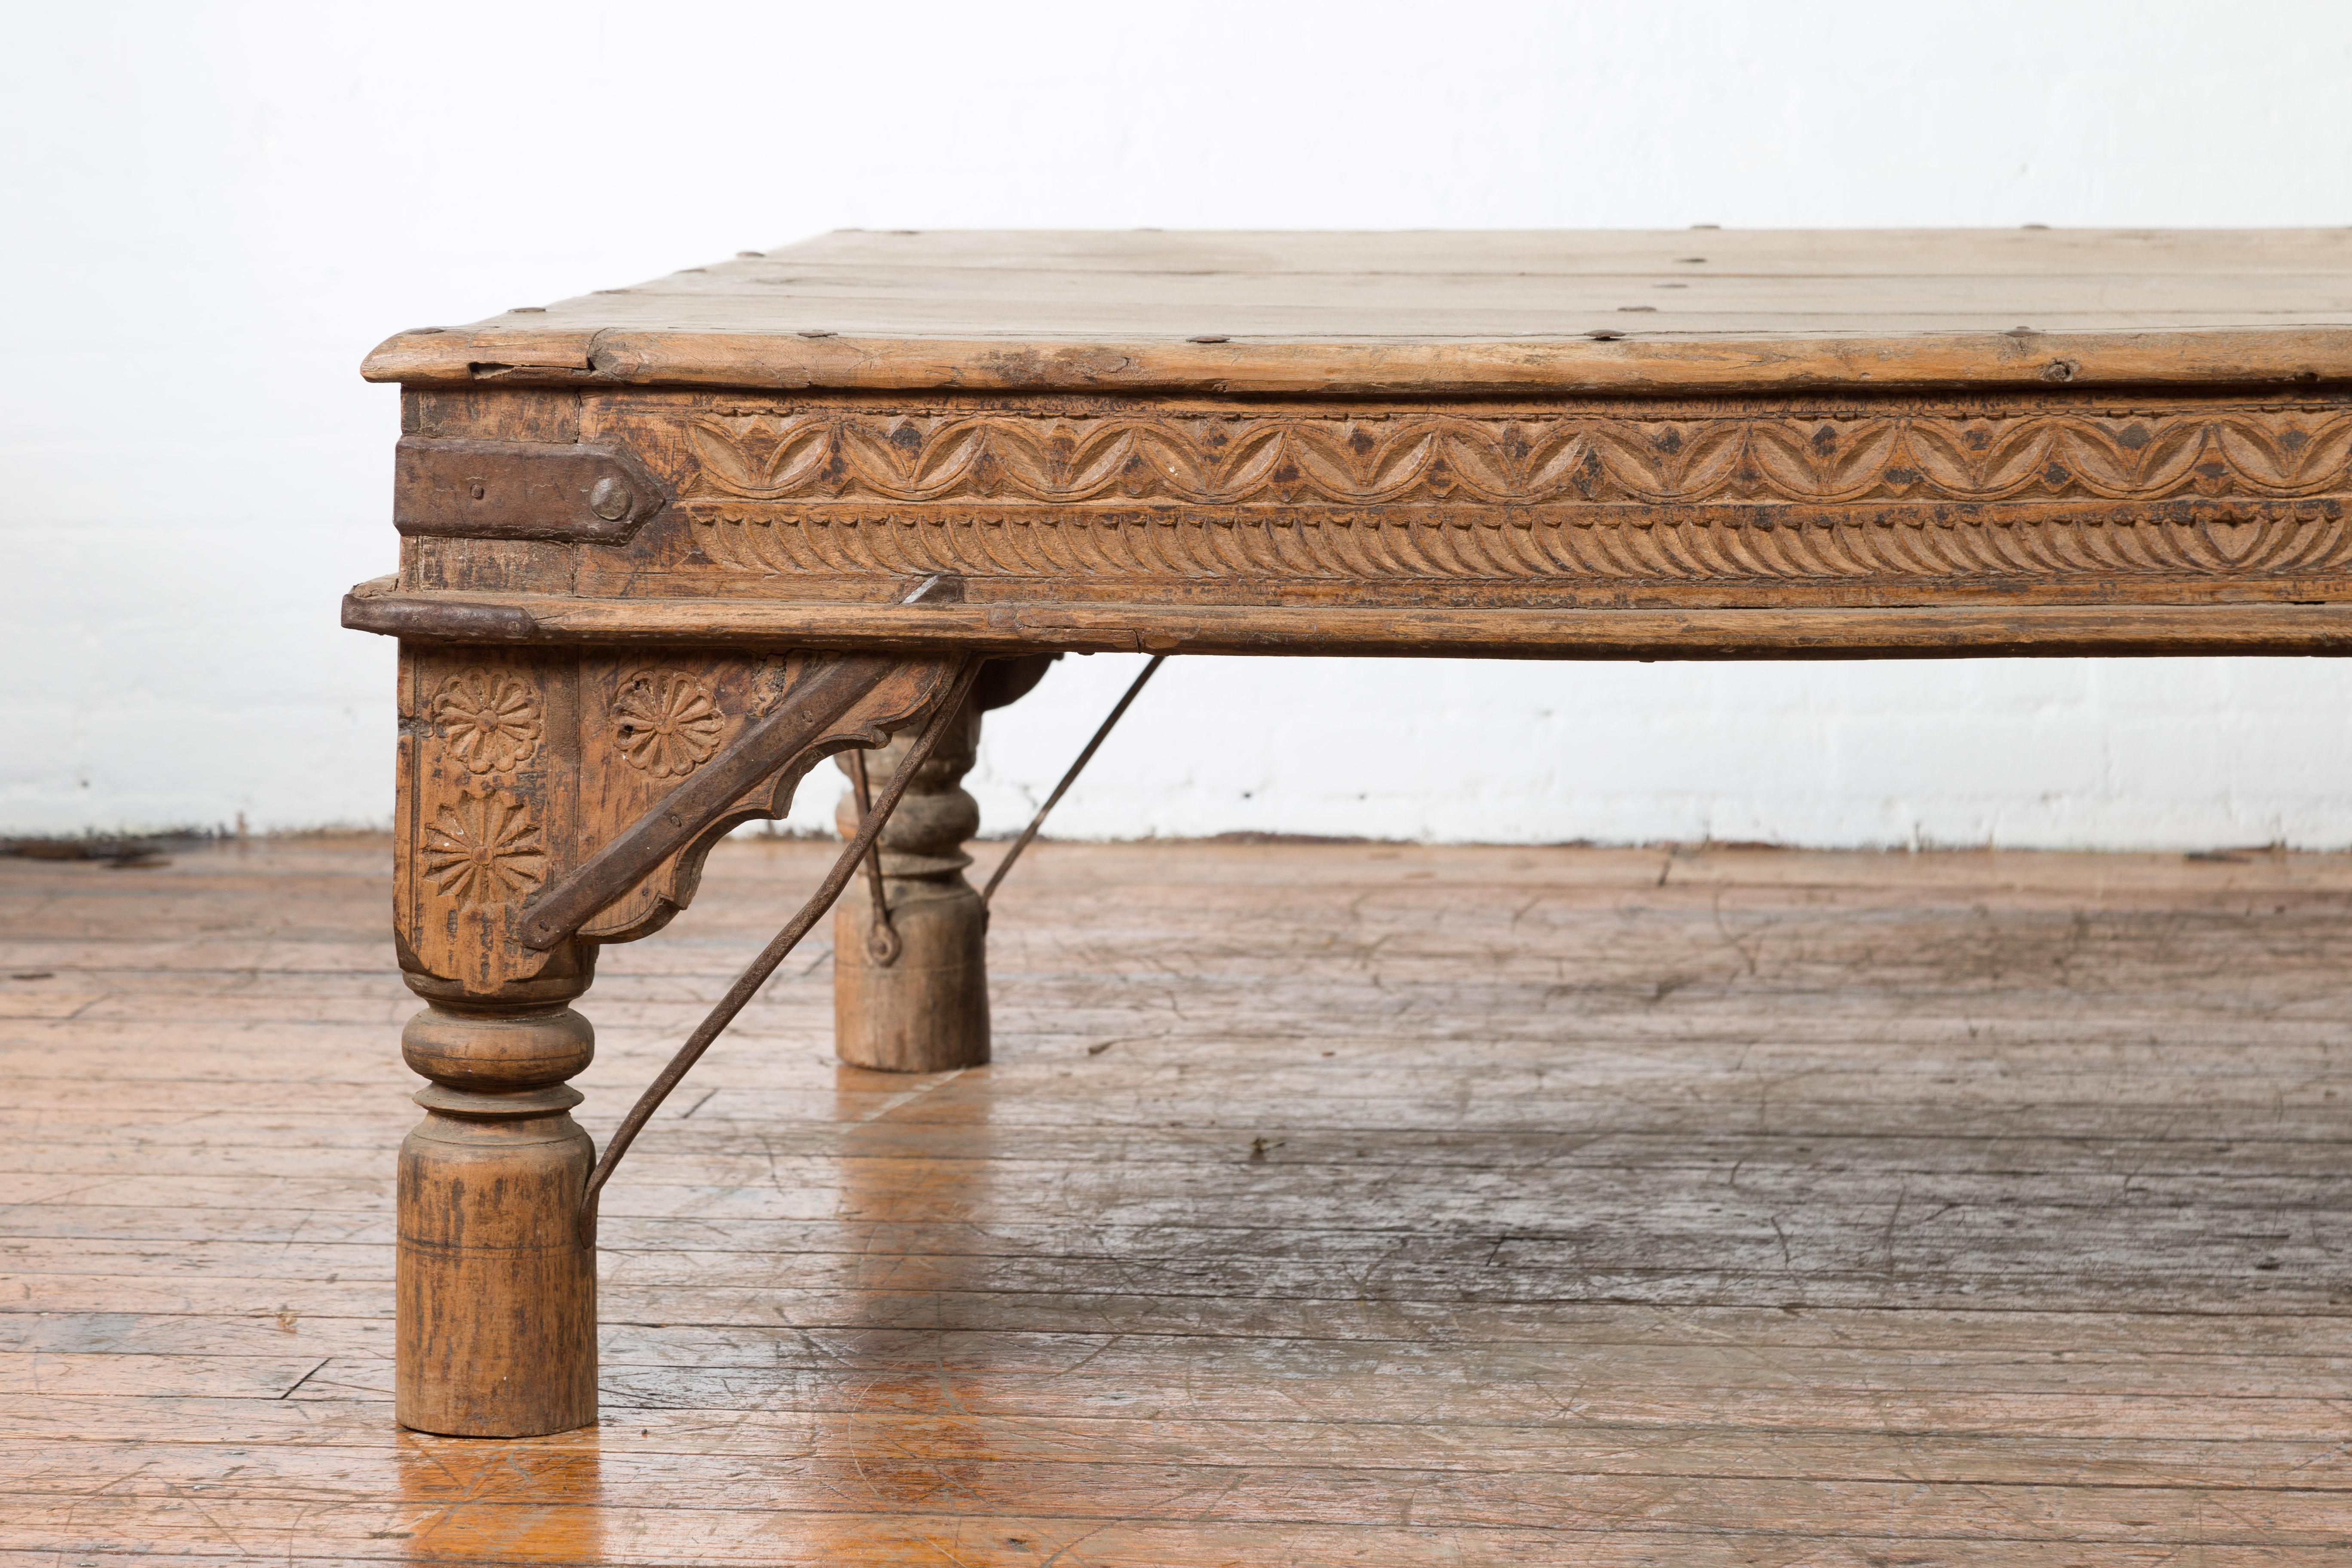 Iron Oversized Antique Temple Door with Studs Made into a Carved Coffee Table